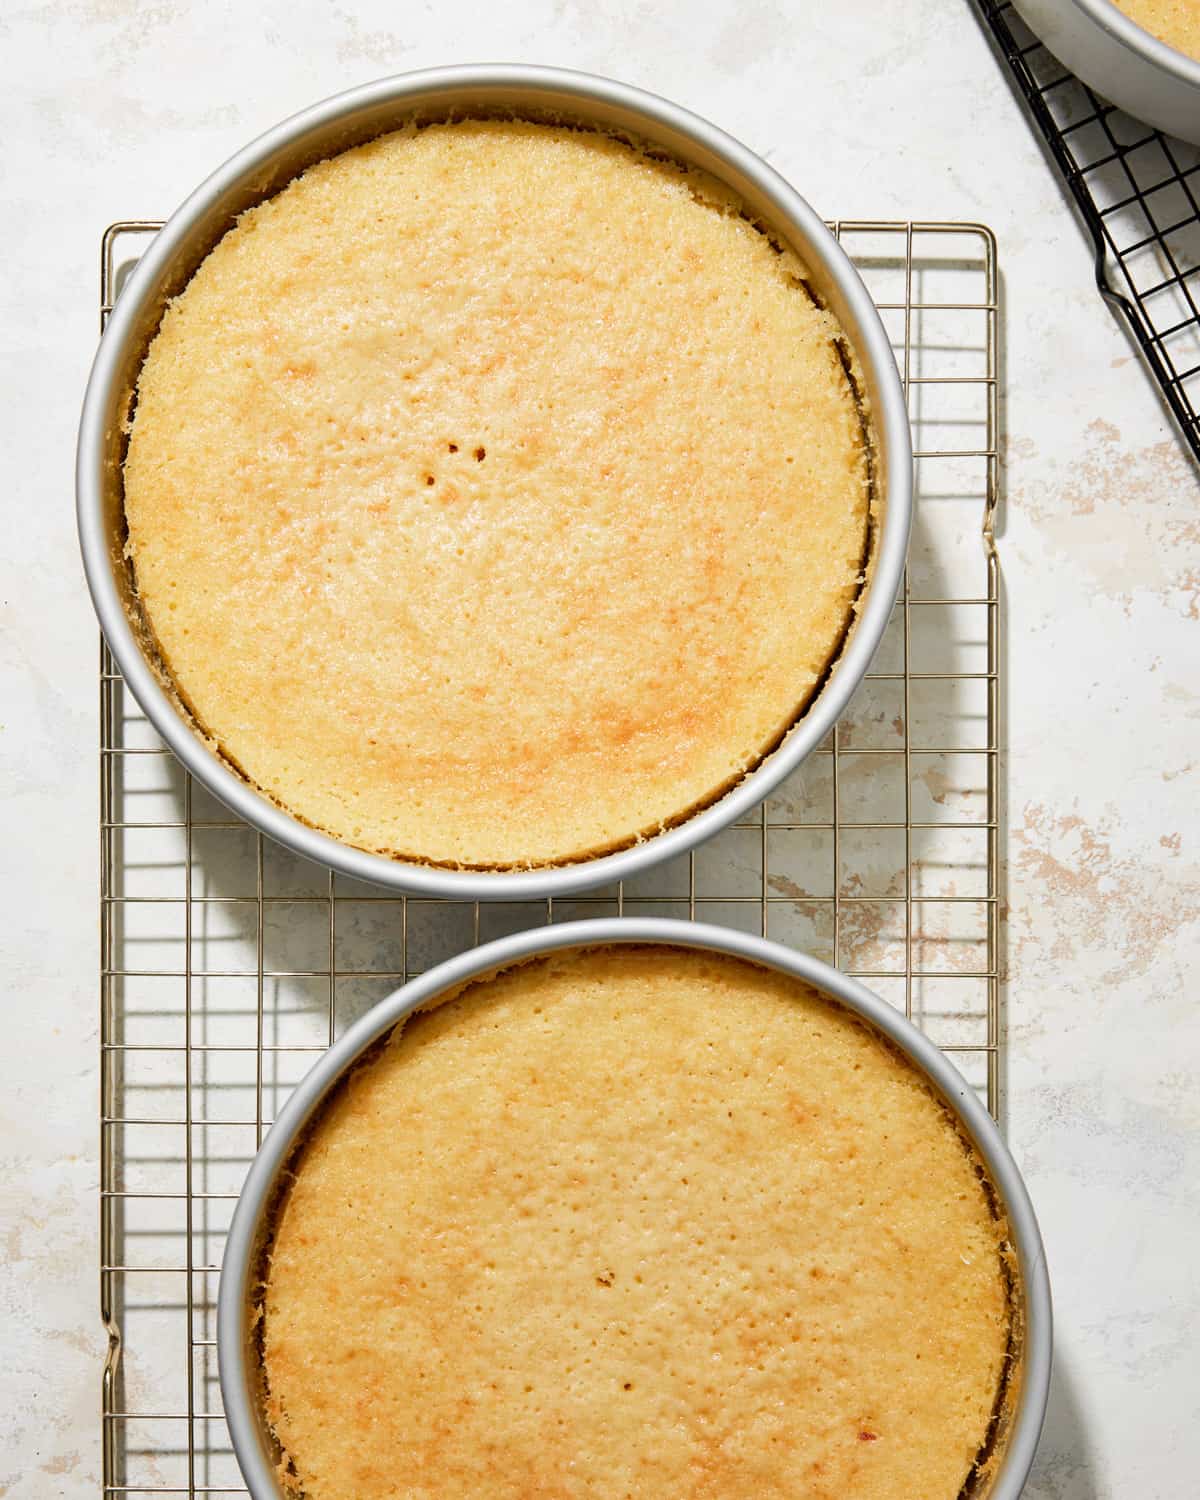 Once baked, allow the cakes to cool in the pans for 10 minutes before transferring them to a wire rack to cool completely.